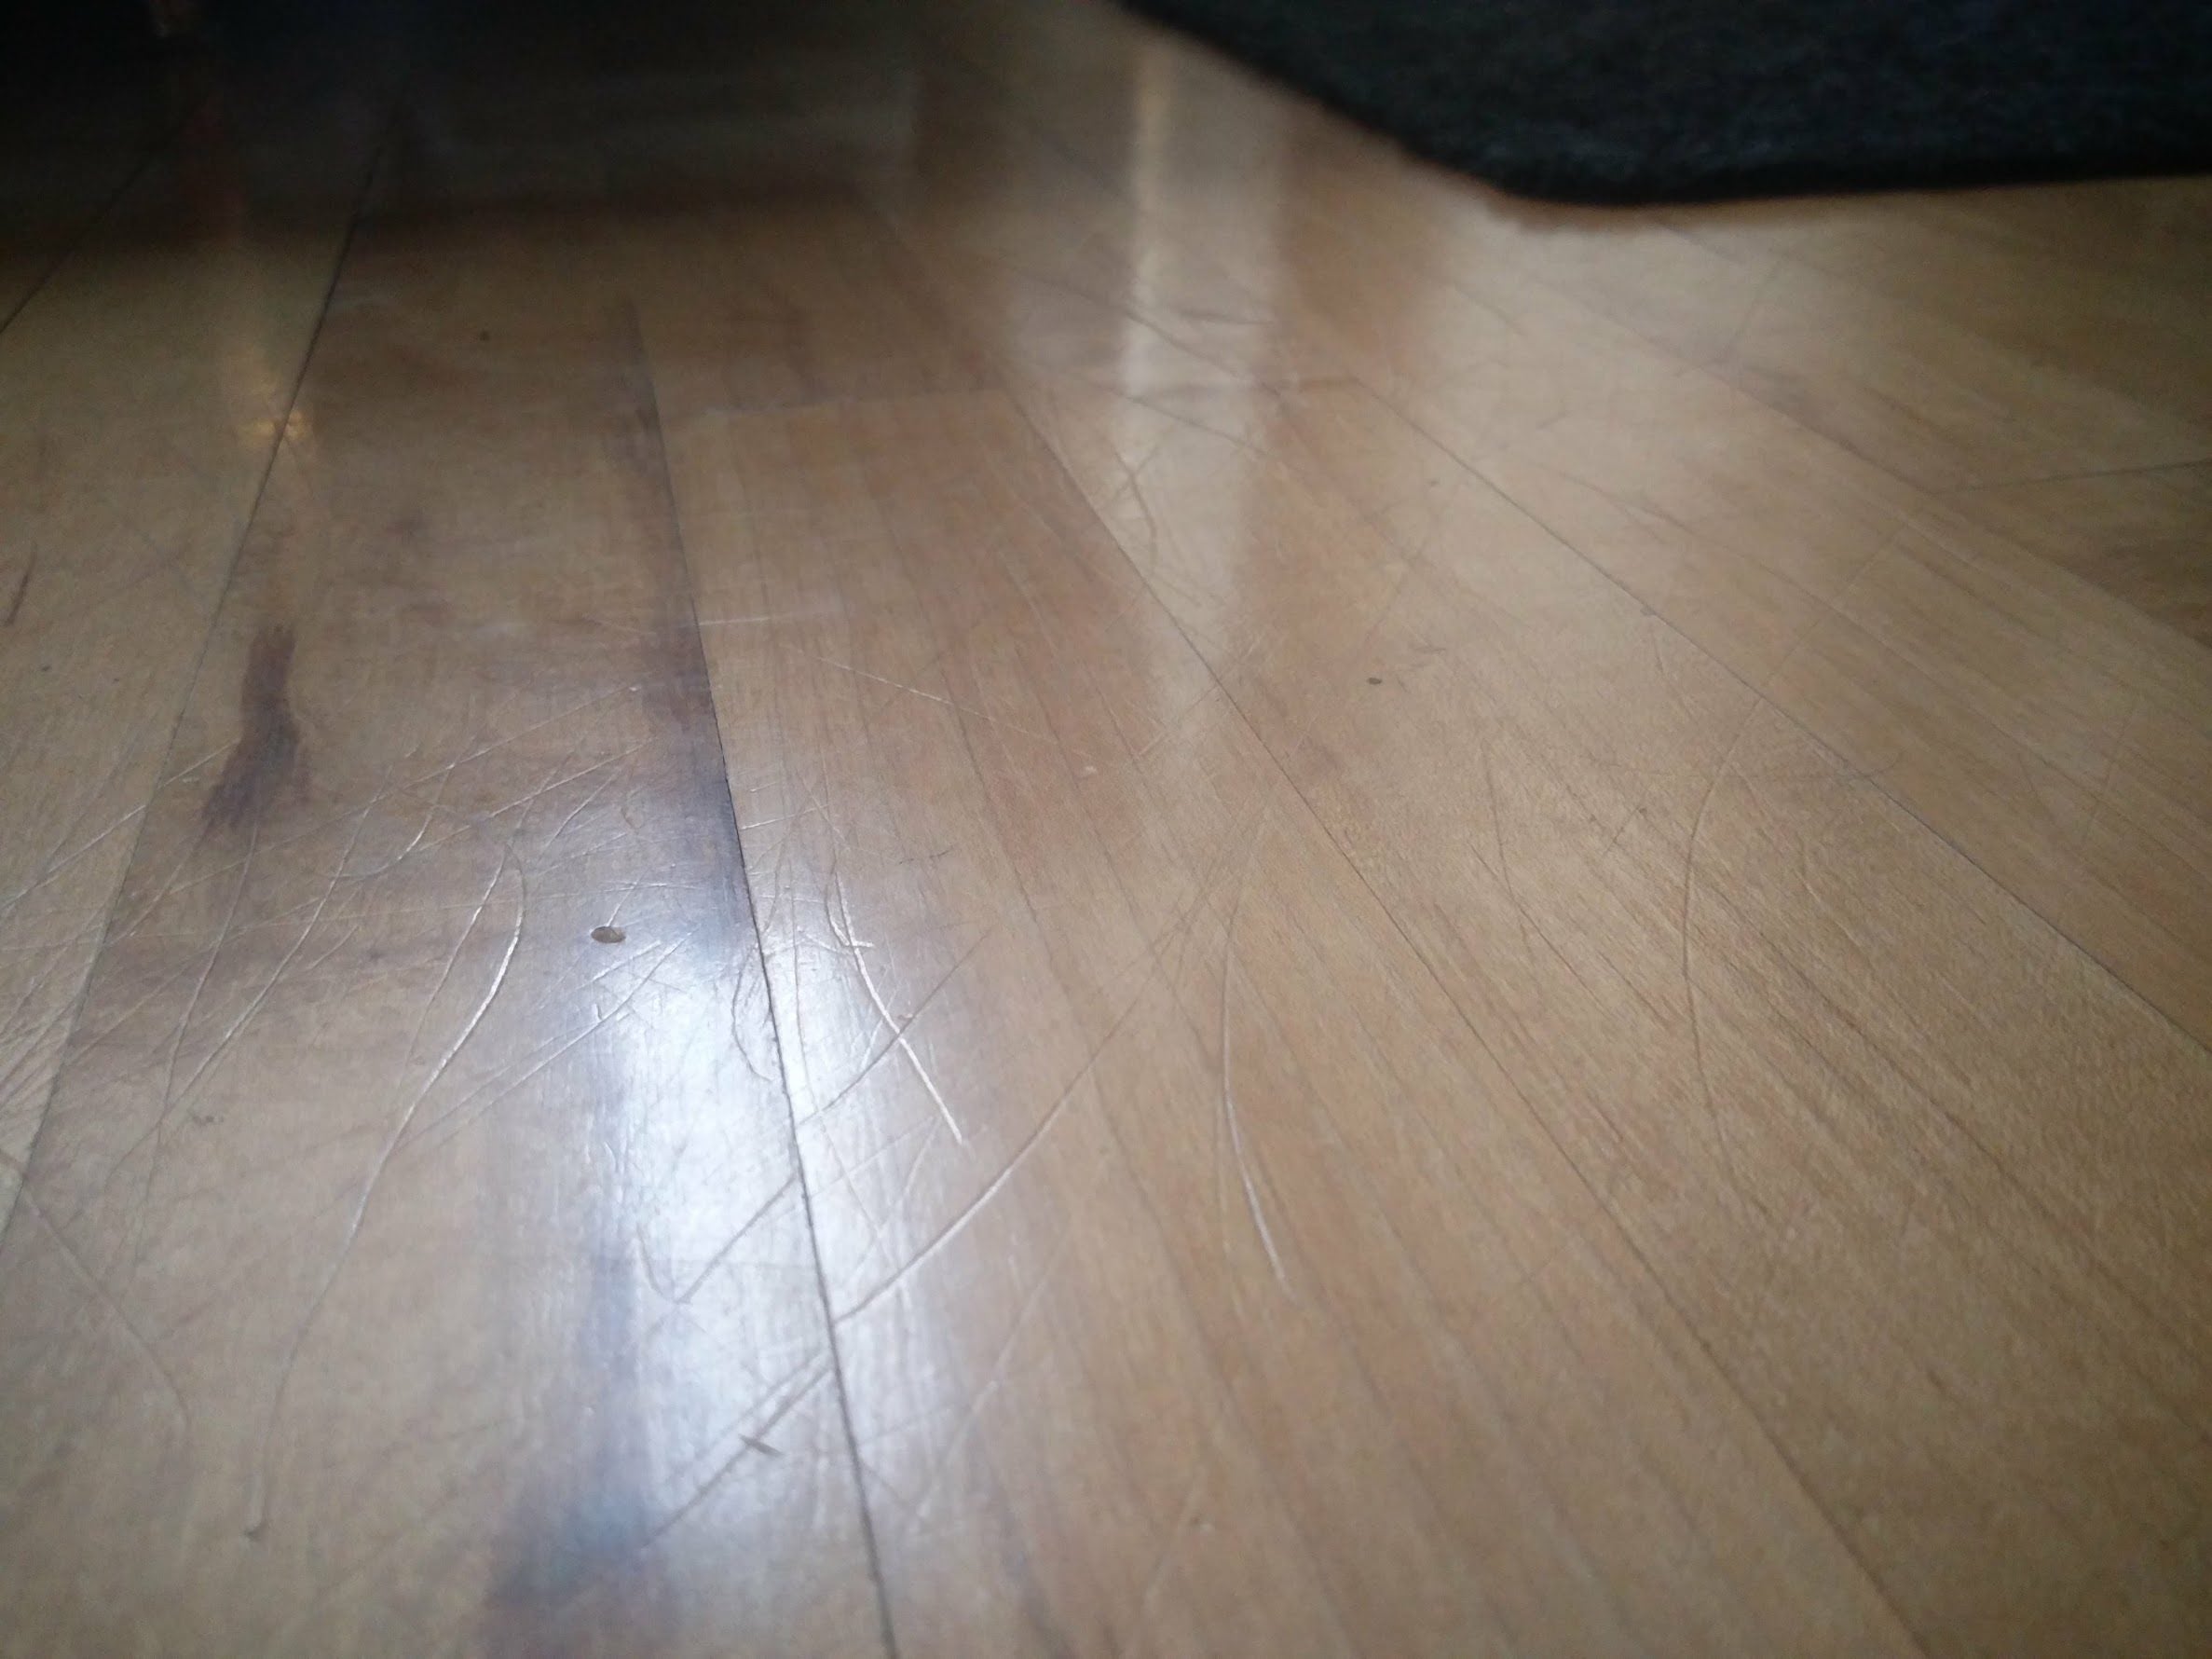 Remove Dog Nail Scratches From Hardwood, How To Remove Dog Nail Scratches From Hardwood Floors